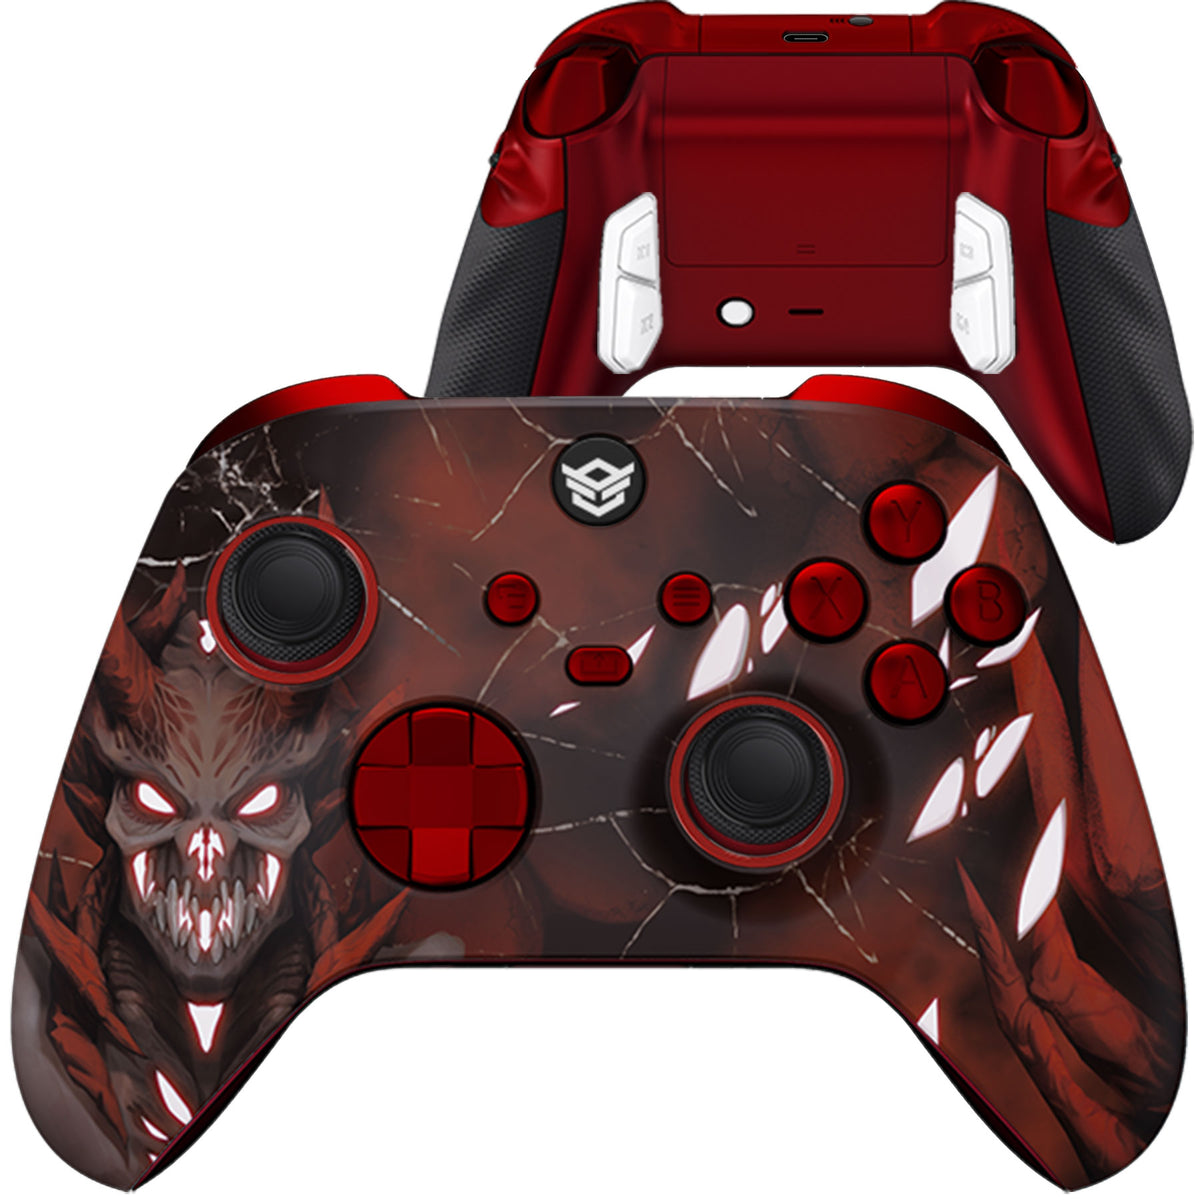 Now Gamepad Support! Xbox Controller And PS4 Controller - Devil